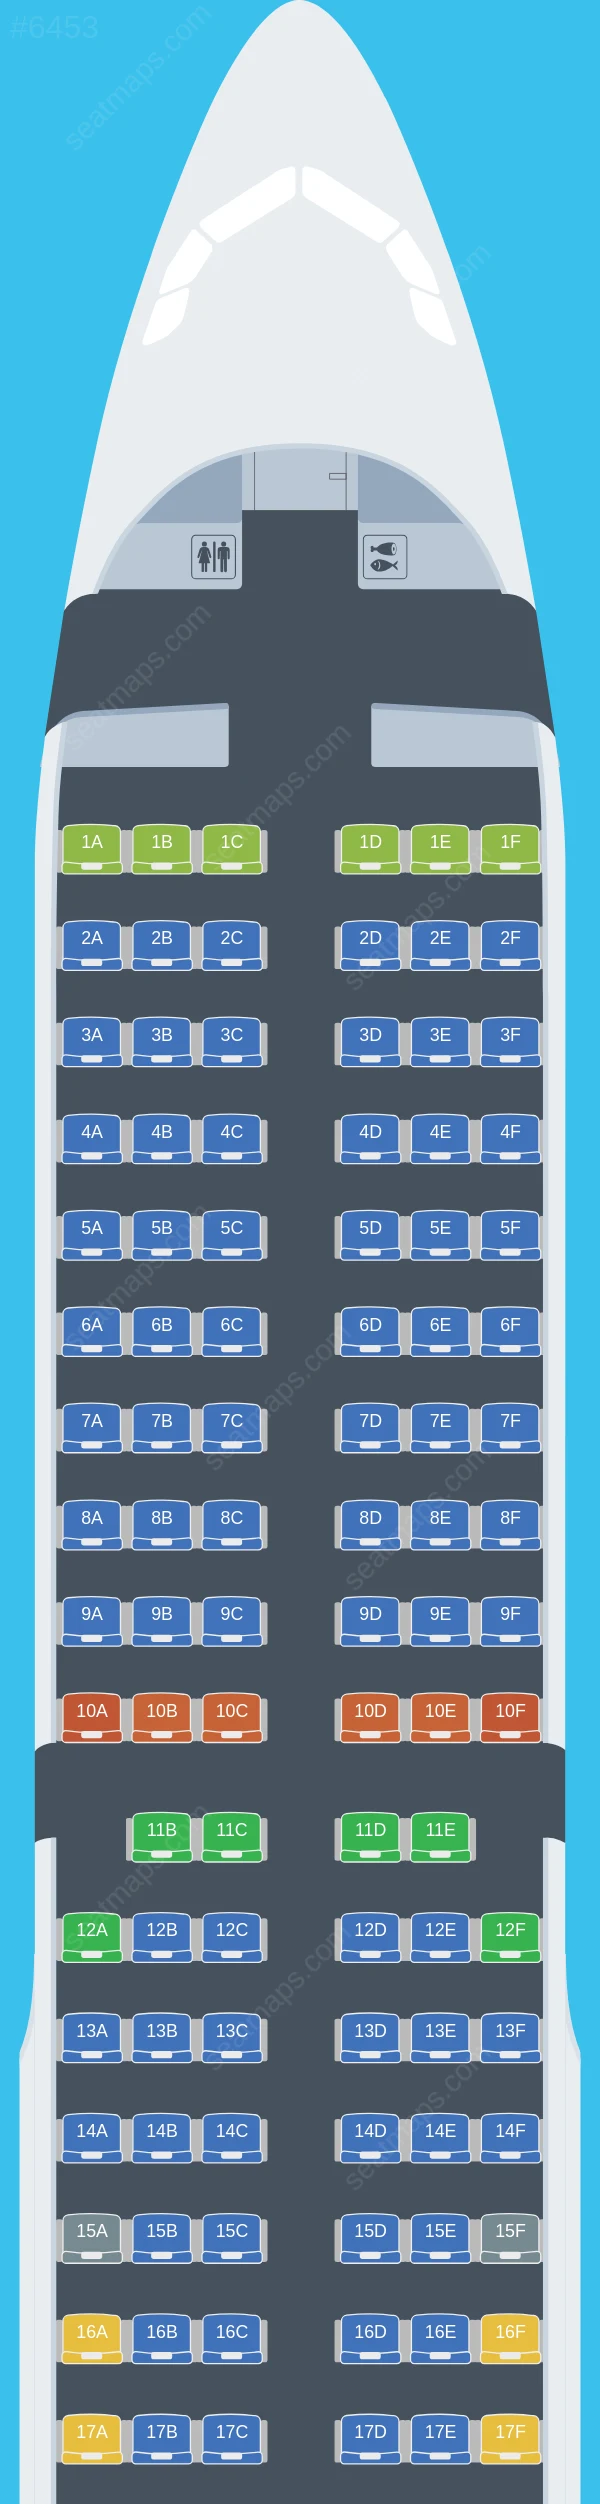 AirBlue Airbus A321-200 seatmap preview